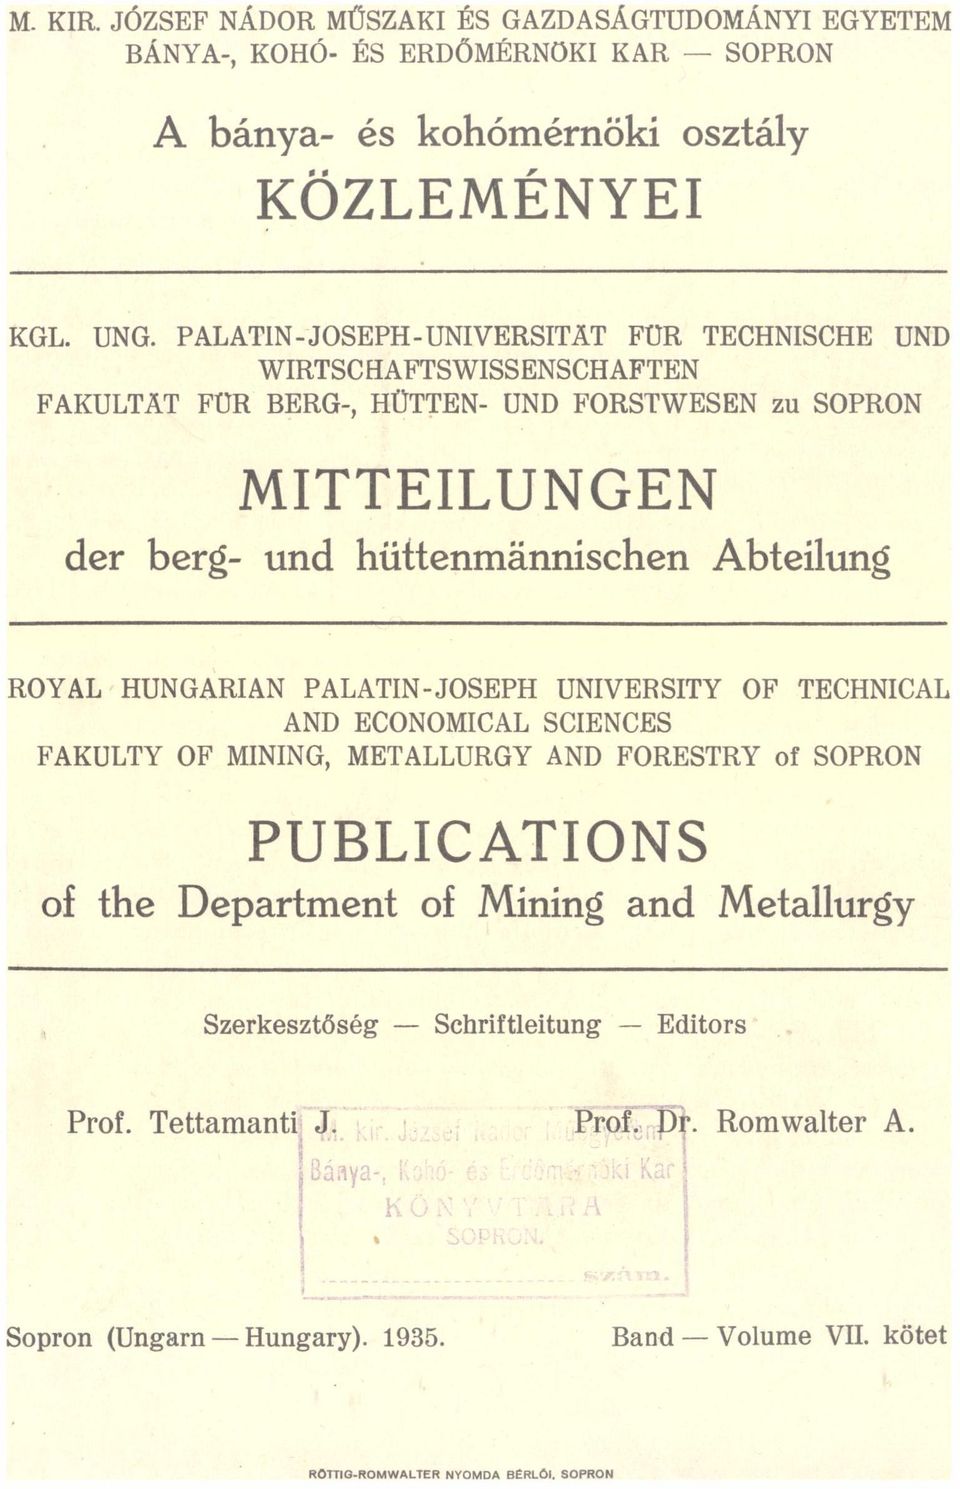 Abteiung ROYAL HUNGARIAN PALATIN-JOSEPH UNIVEBSITY OF TECHNICAL AND ECONOMICAL SCIENCES FAKULTY OF MINING, METALLURGY AND FORESTRY of SOPRON PUBLICATIONS of the